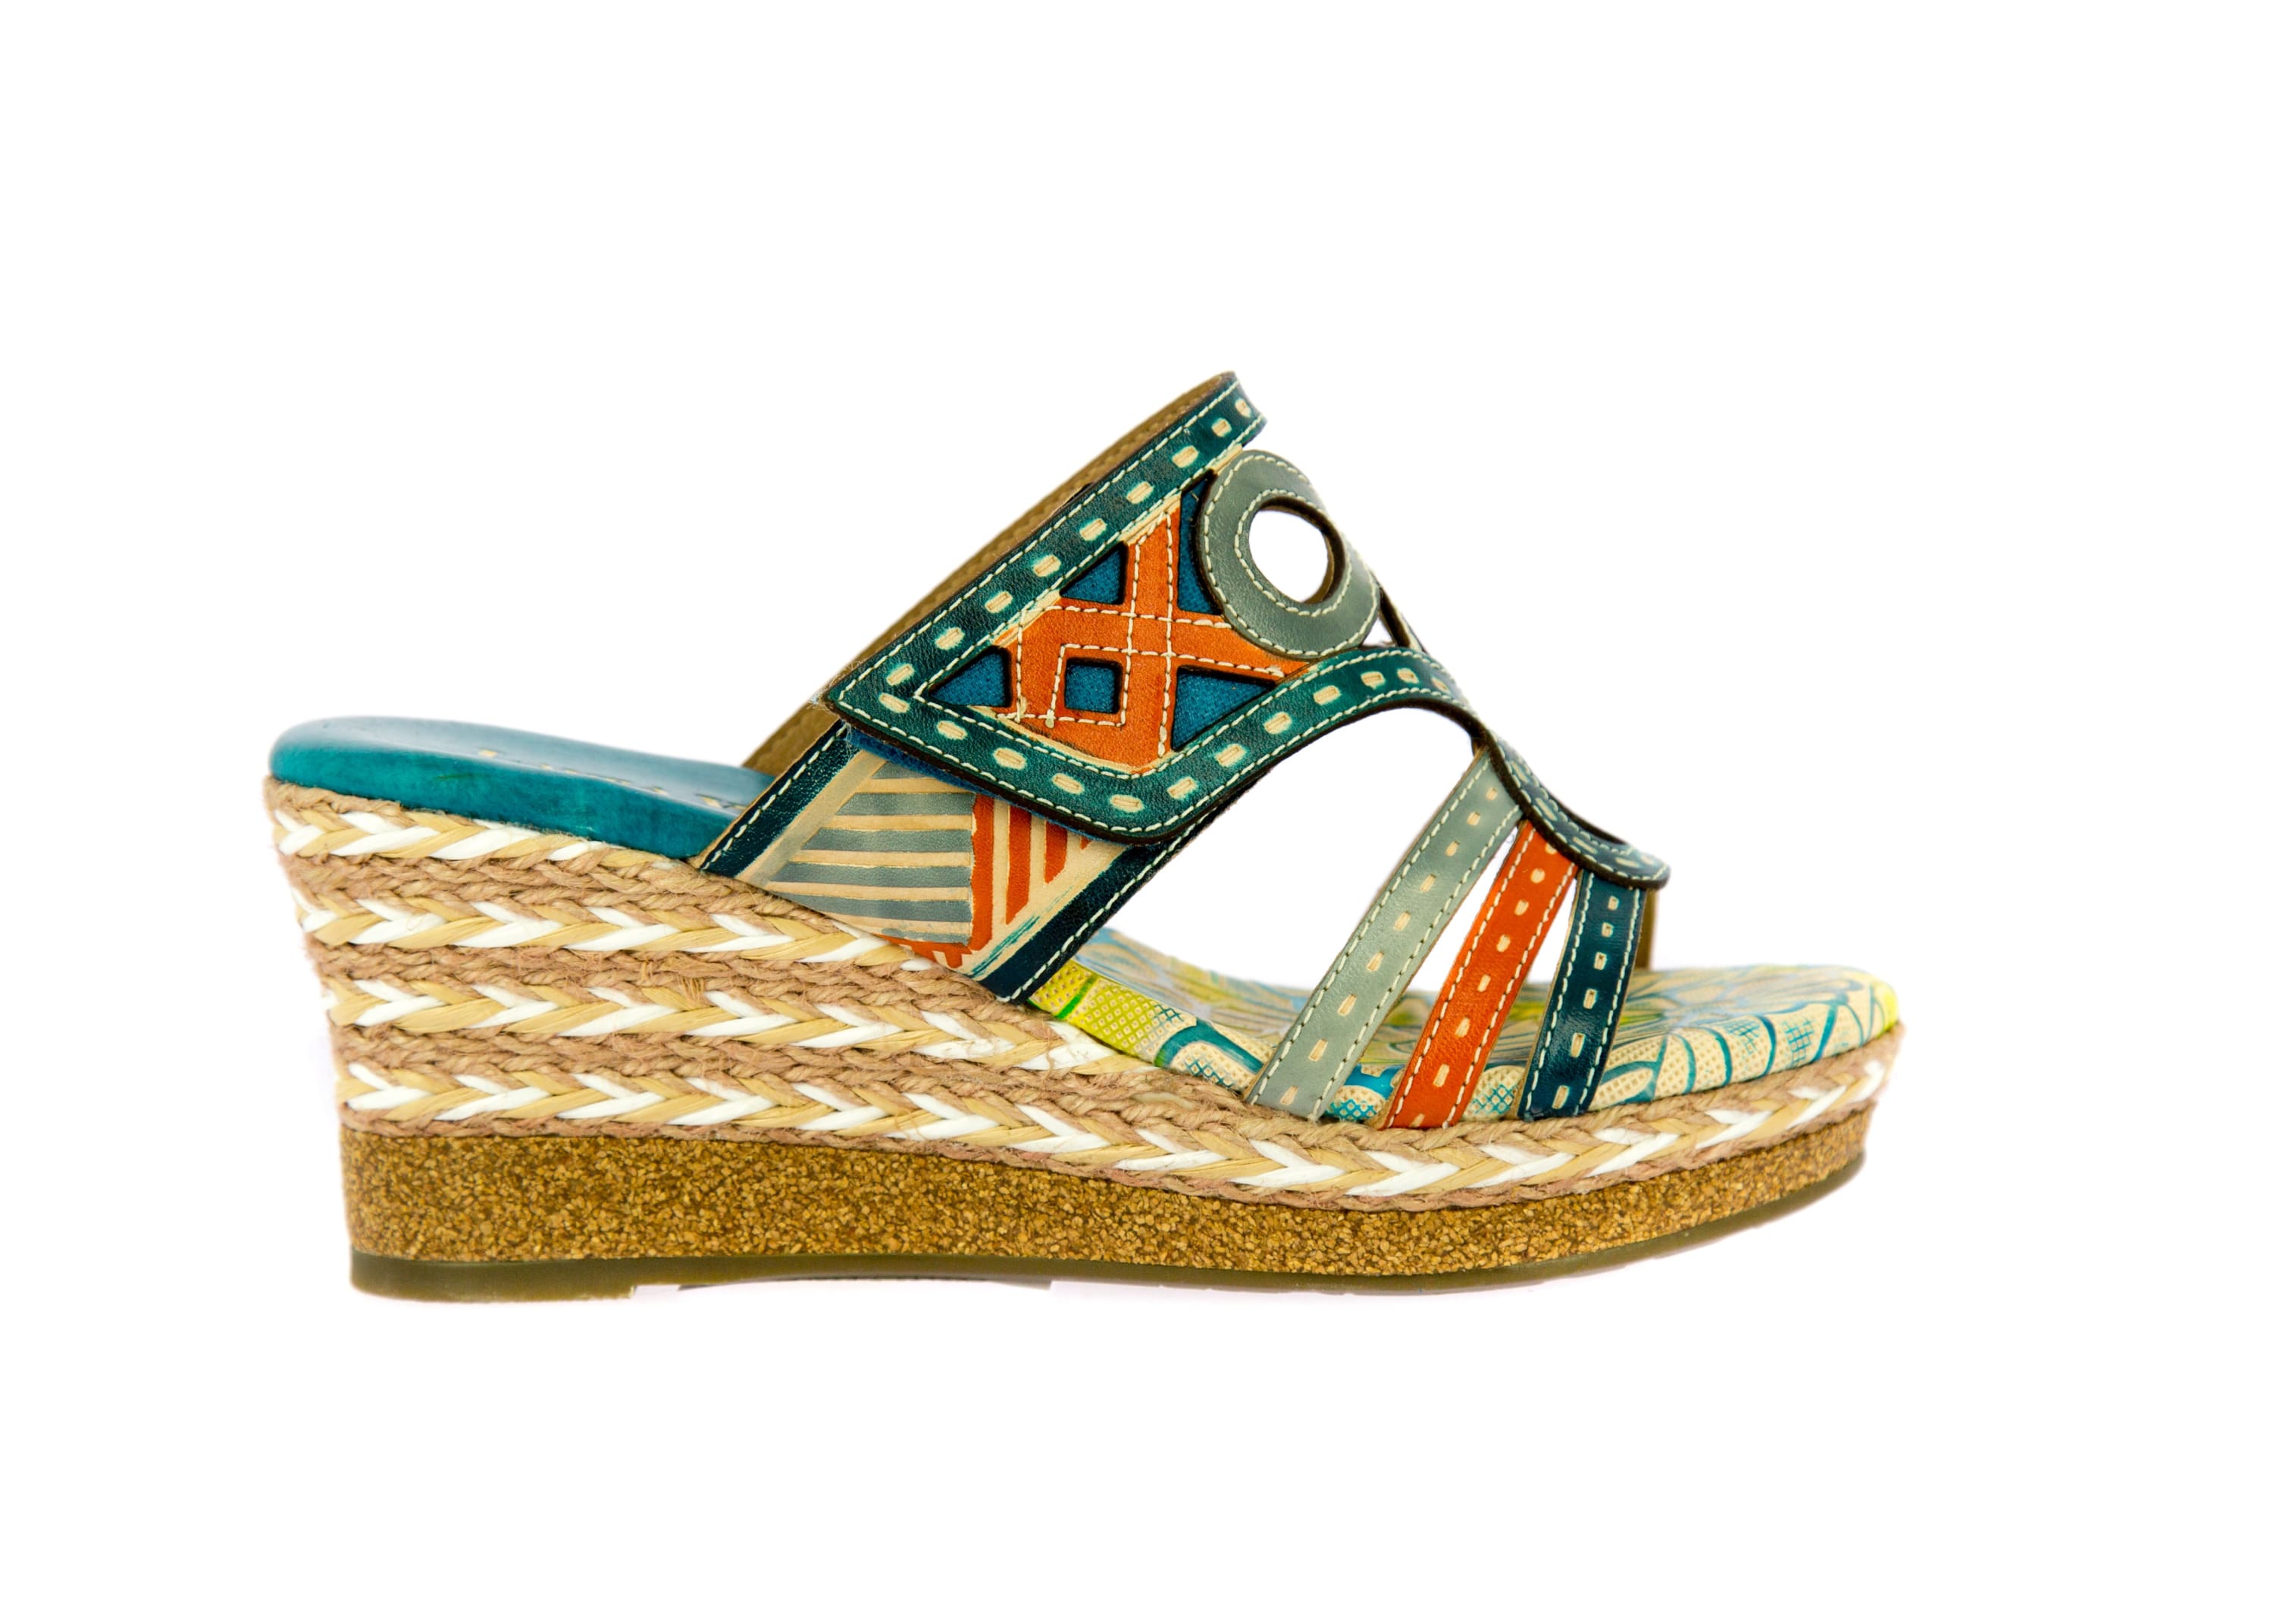 DAUPHIN 02 shoes - 35 / Turquoise - Mule